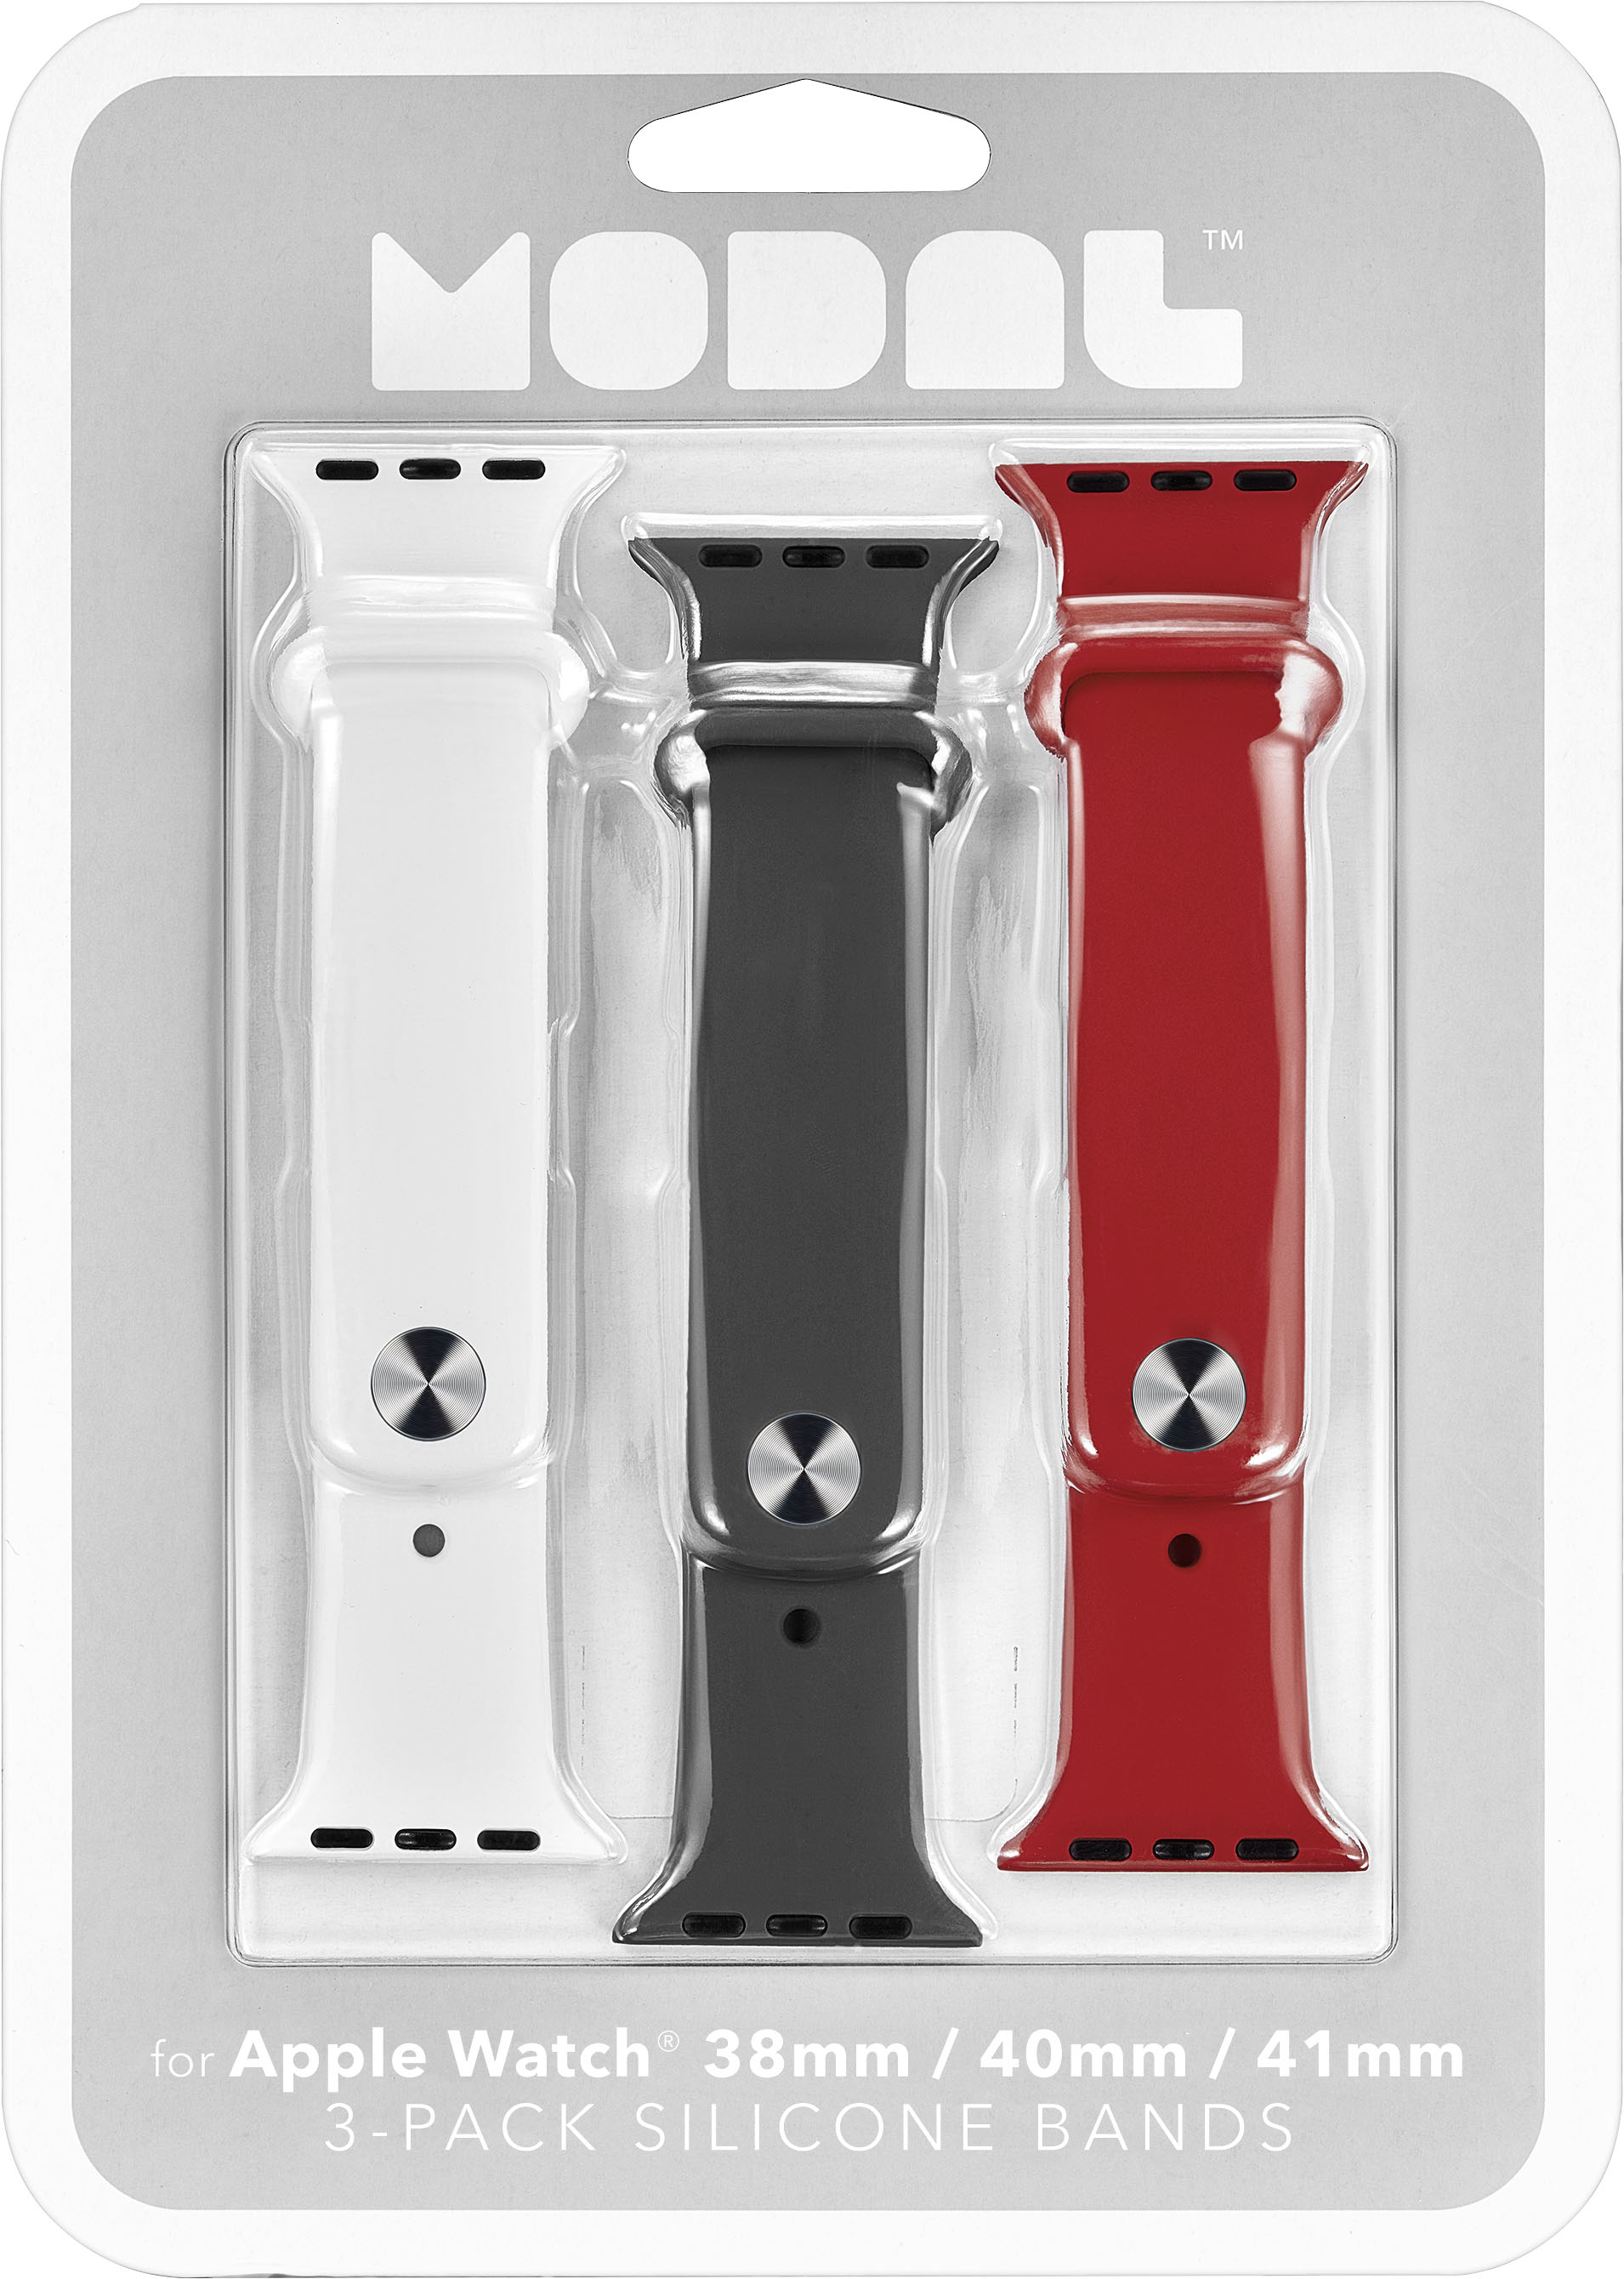 Angle View: Modal™ - Silicone Watch Band for Apple Watch 38 mm / 40mm / 41mm (3 Pack) - Candy apple red, snow white, stormy gray